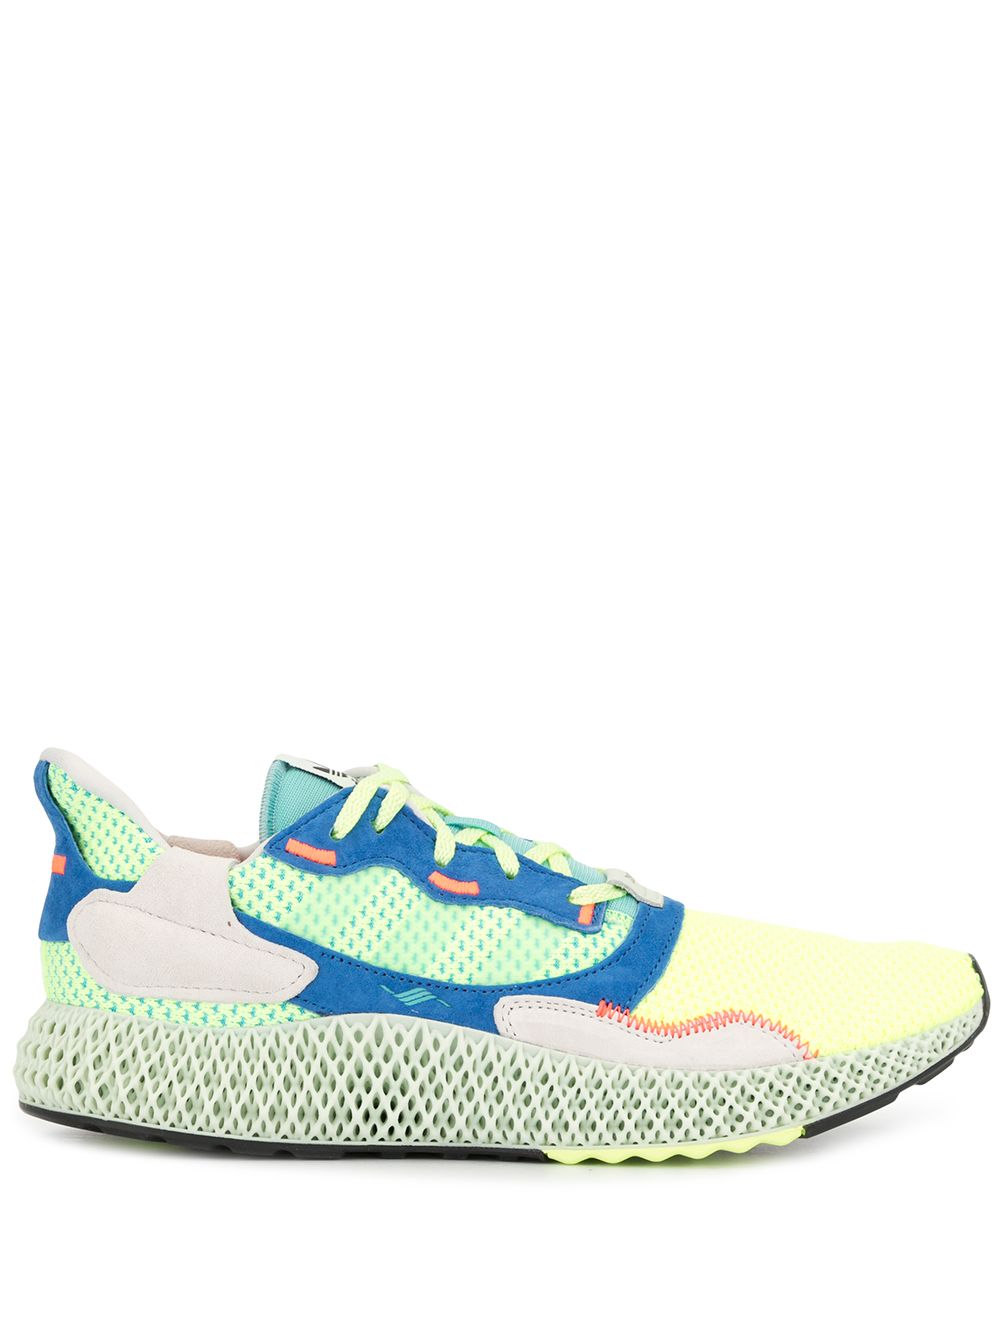 adidas ZX 4000 4D "Easy Mint" sneakers - Yellow von adidas